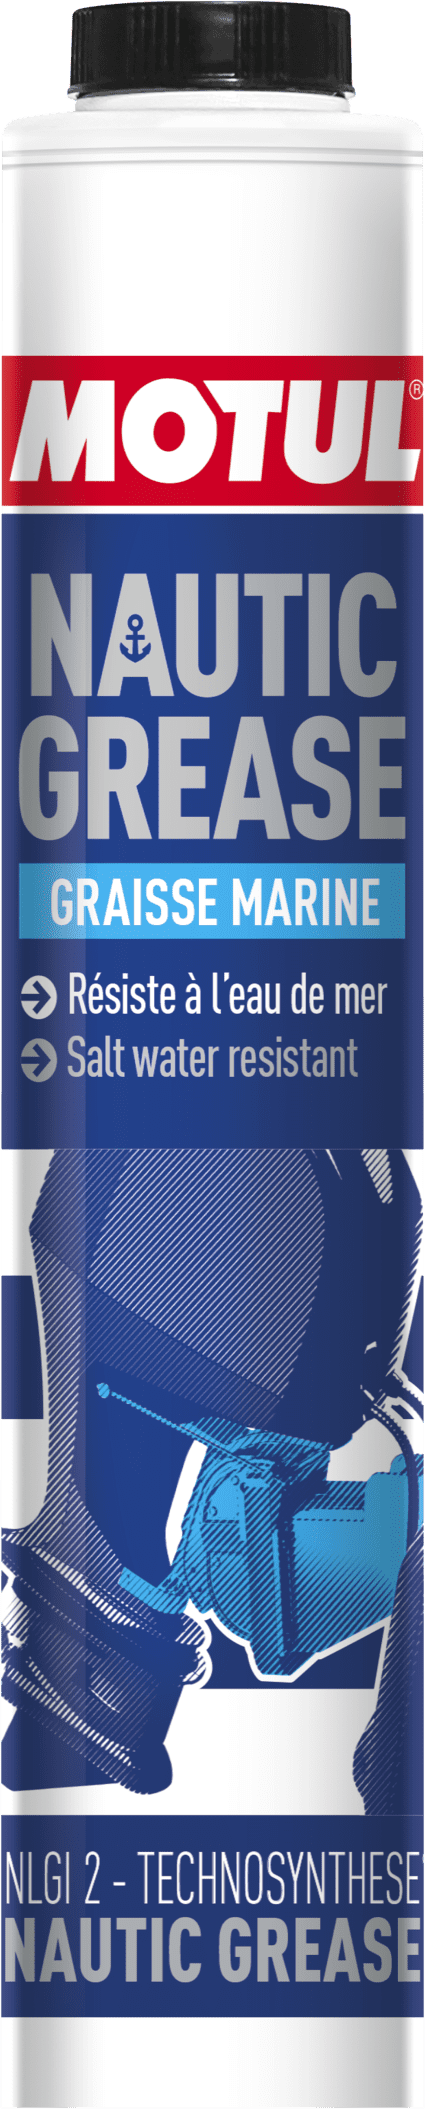 108661-400GR High performance multipurpose water-resistant grease with Extreme Pressure properties, developed to lubricate and protect all mechanical parts against corrosion and wear in sea salted environments and other adverse conditions common to marine usage.